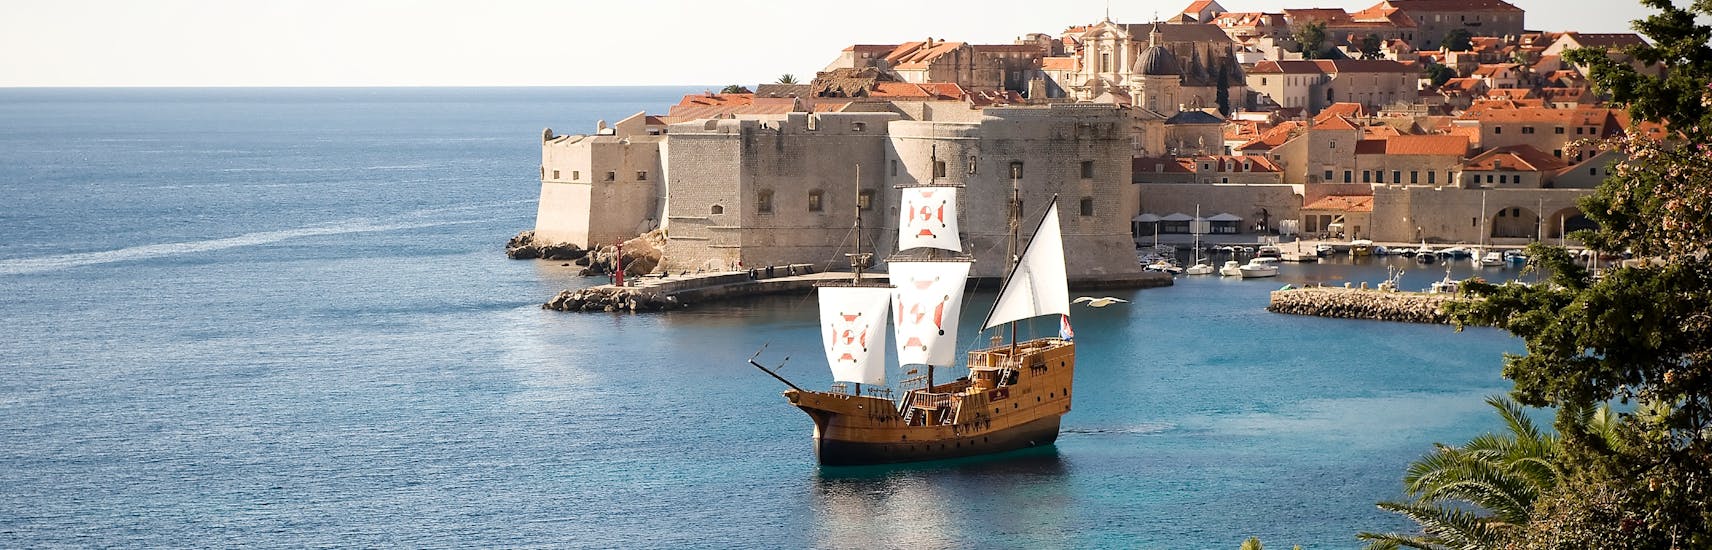 The traditional Karaka ship on the water during the boat trip around the Elaphiti Islands with Karaka Dubrovnik.